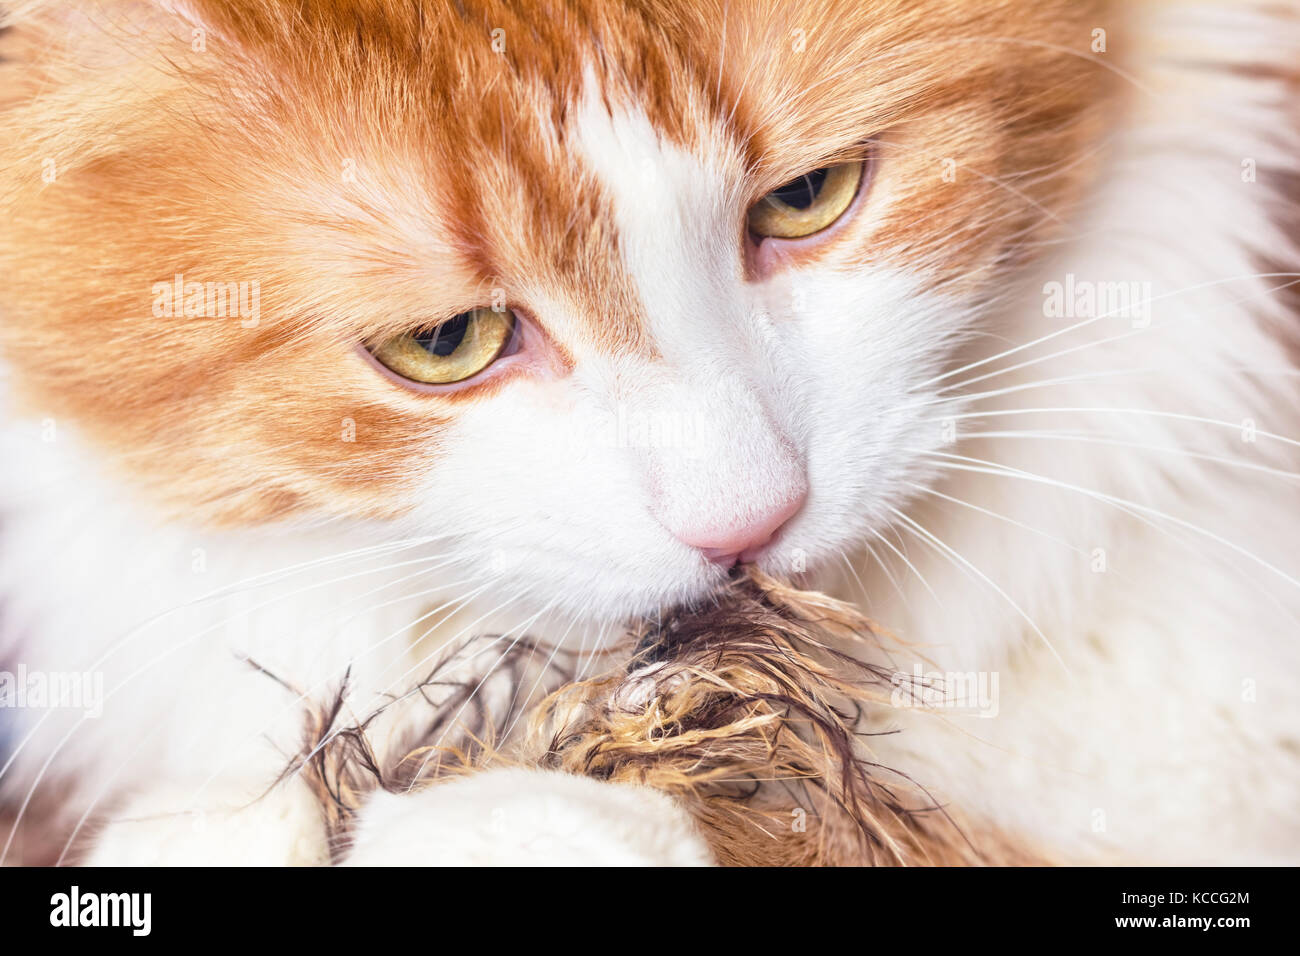 Pretty portrait of red cat with fur toy Stock Photo